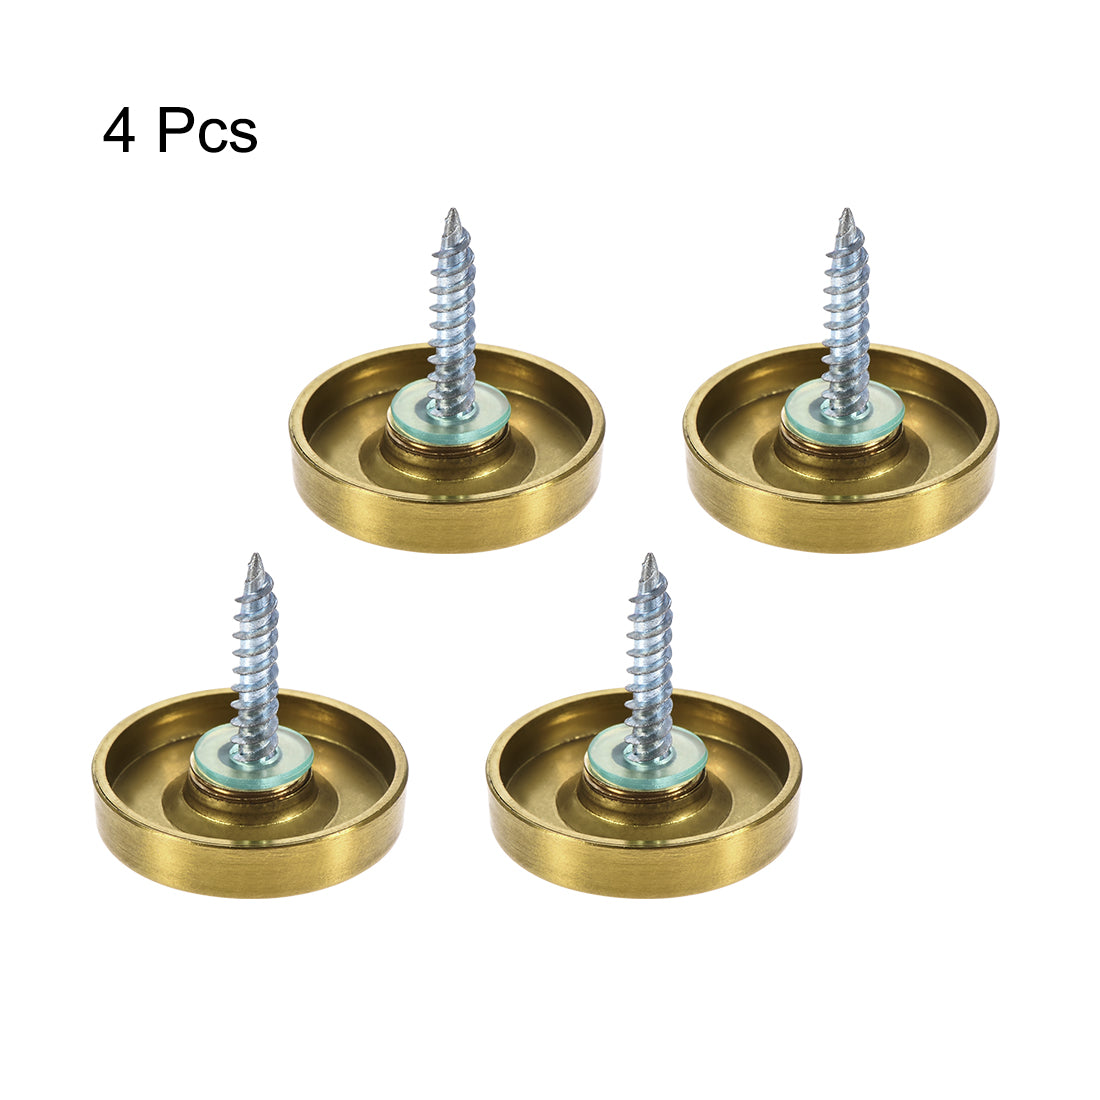 Uxcell Uxcell Mirror Screws, Decorative Cap Fasteners Cover Nails, Electroplated Wire Drawing, Golden 22mm/0.87" 4pcs